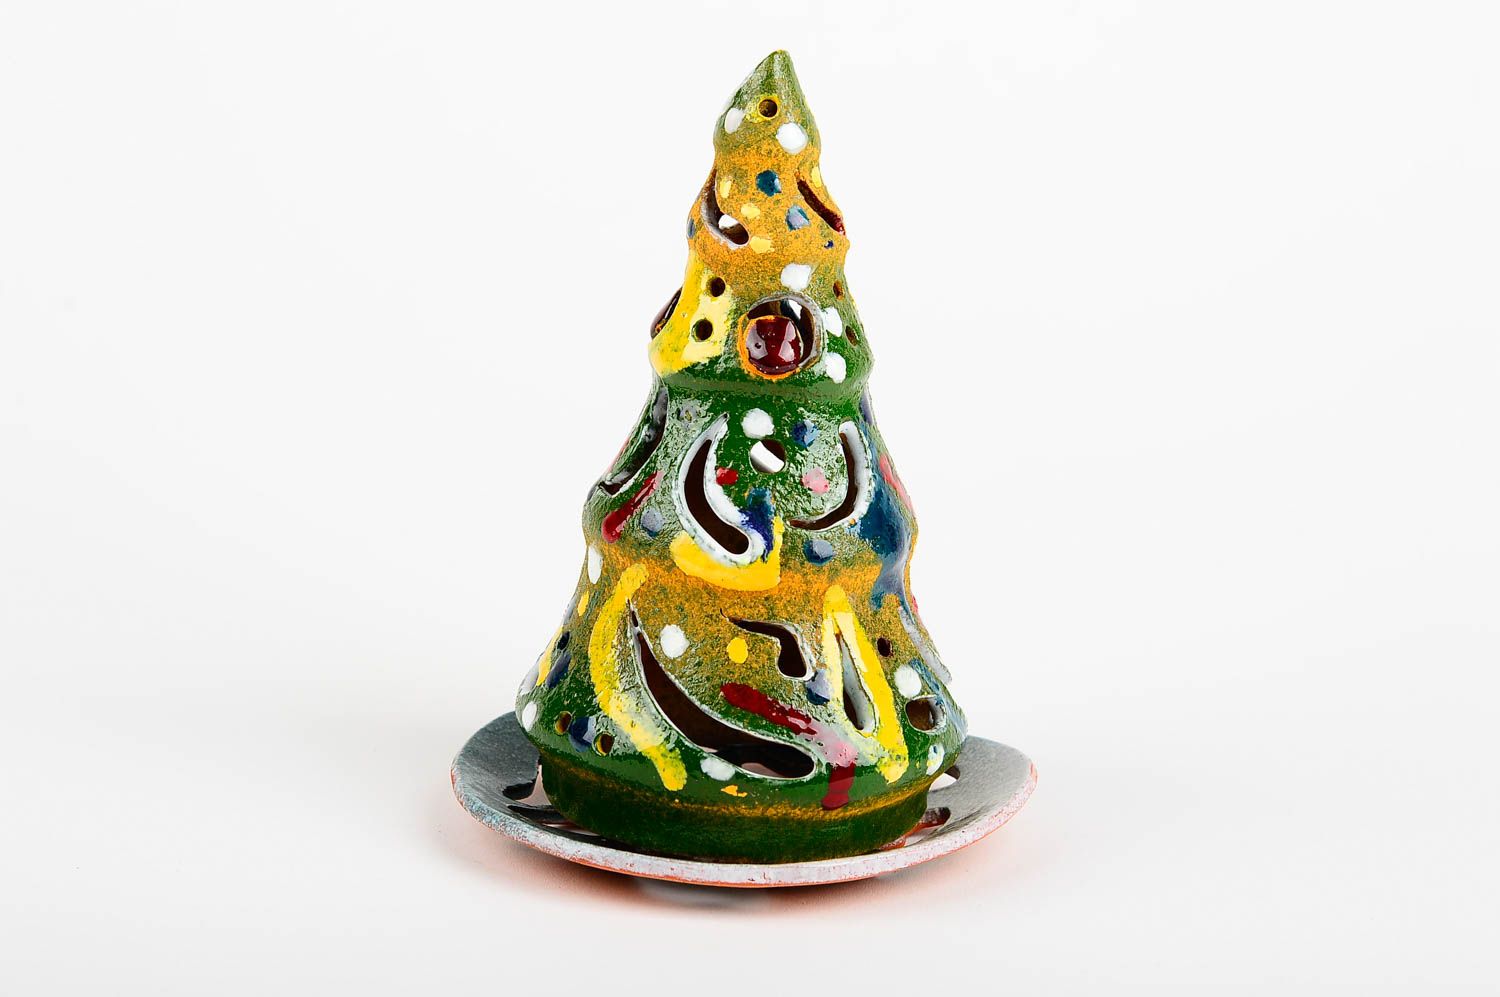 Tealight ceramic light-glow Christmas tree candle holder 5,9 inches, 0,43 lb photo 1